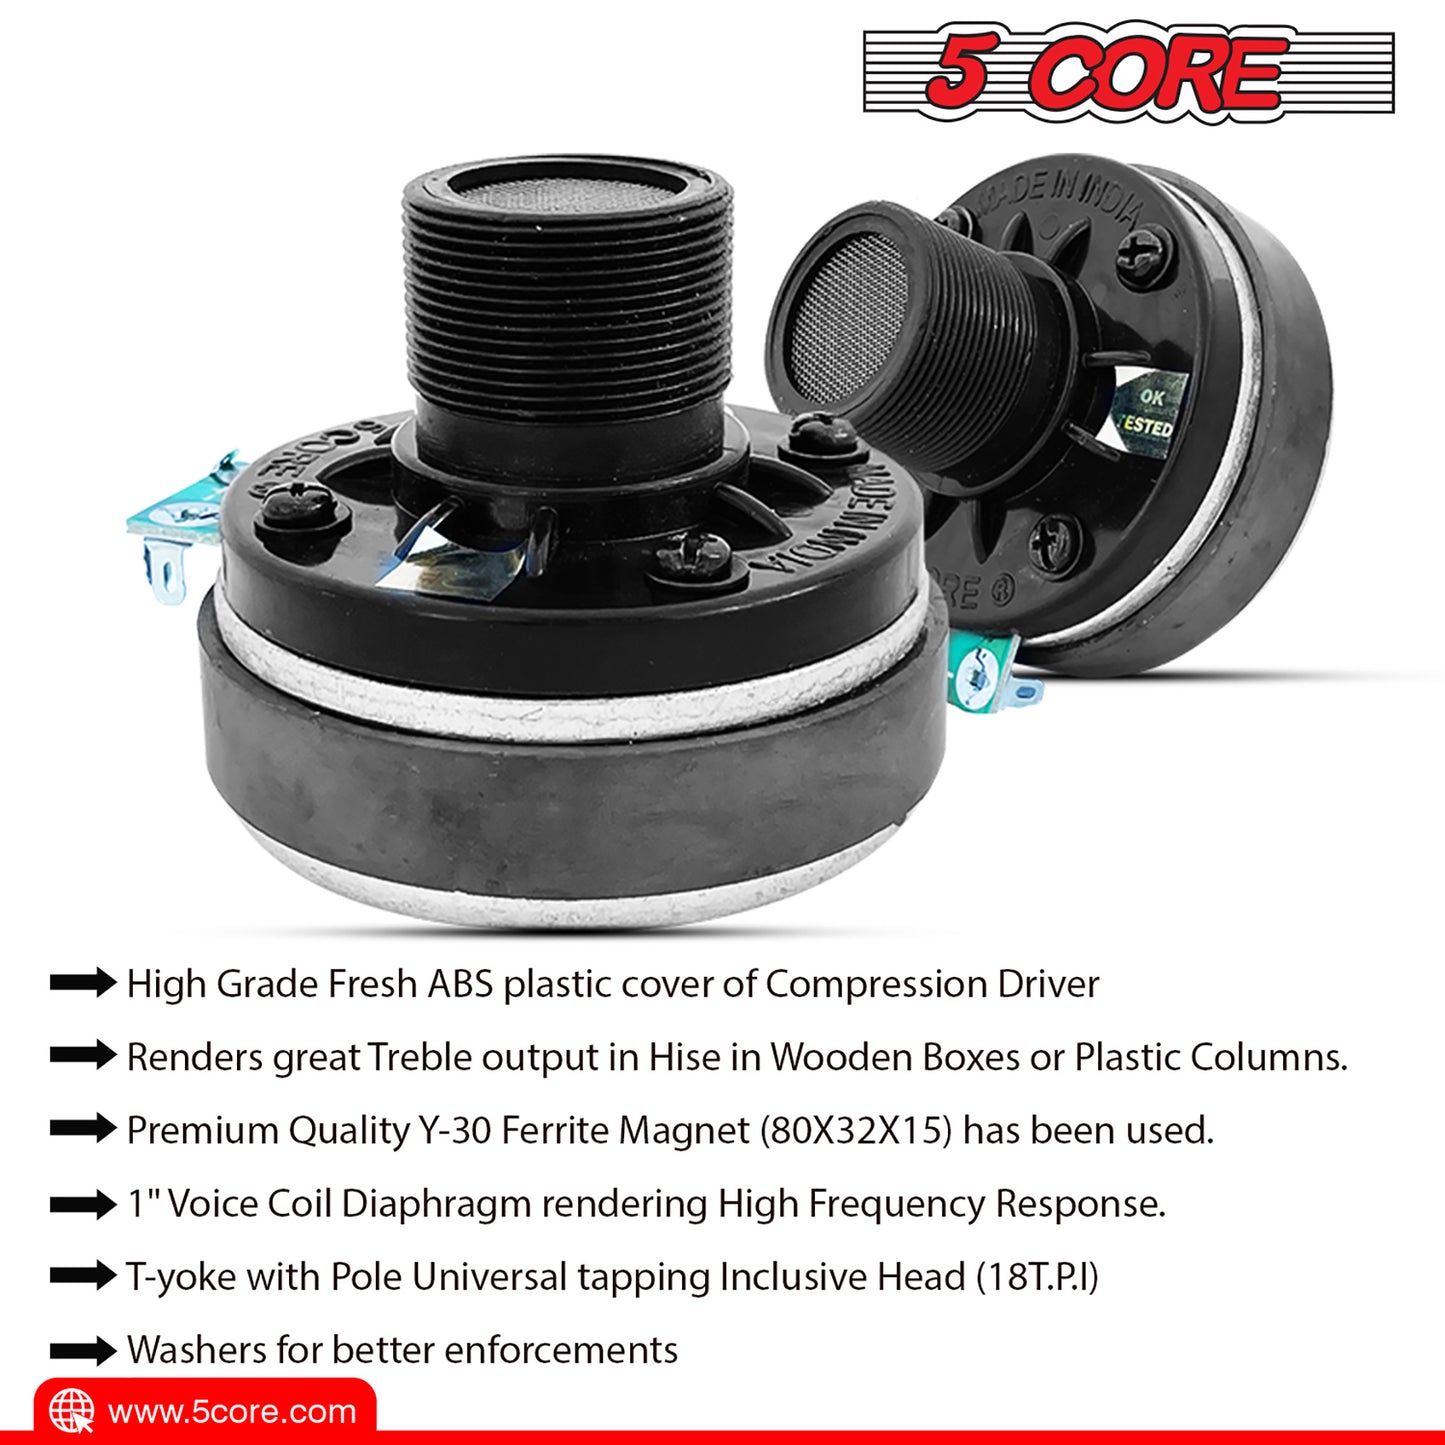 5 Core High Frequency Compression Horn Driver 8 Ohms